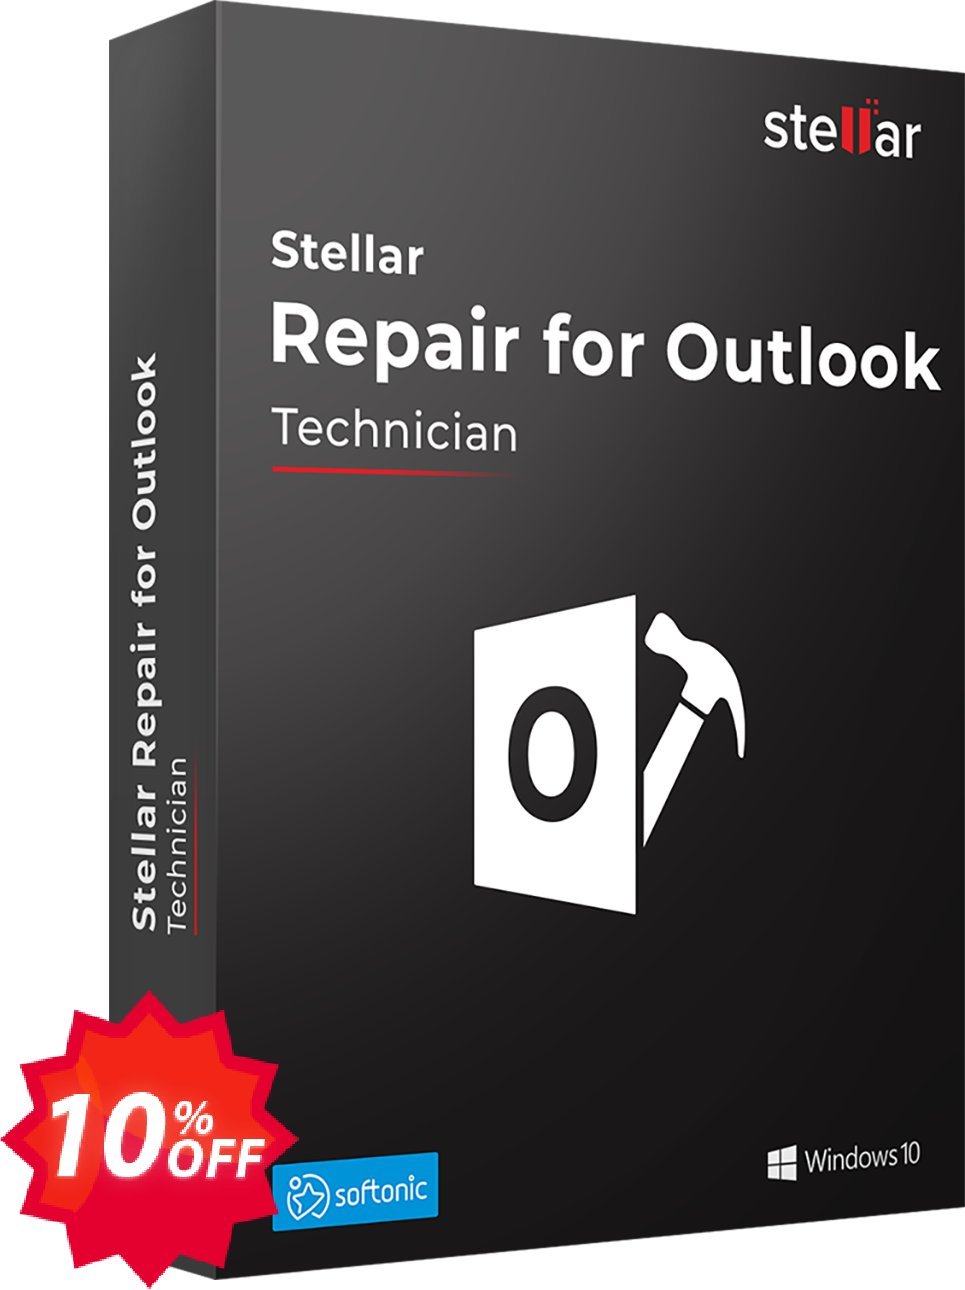 Stellar Repair for Outlook Technician, Yearly  Coupon code 10% discount 